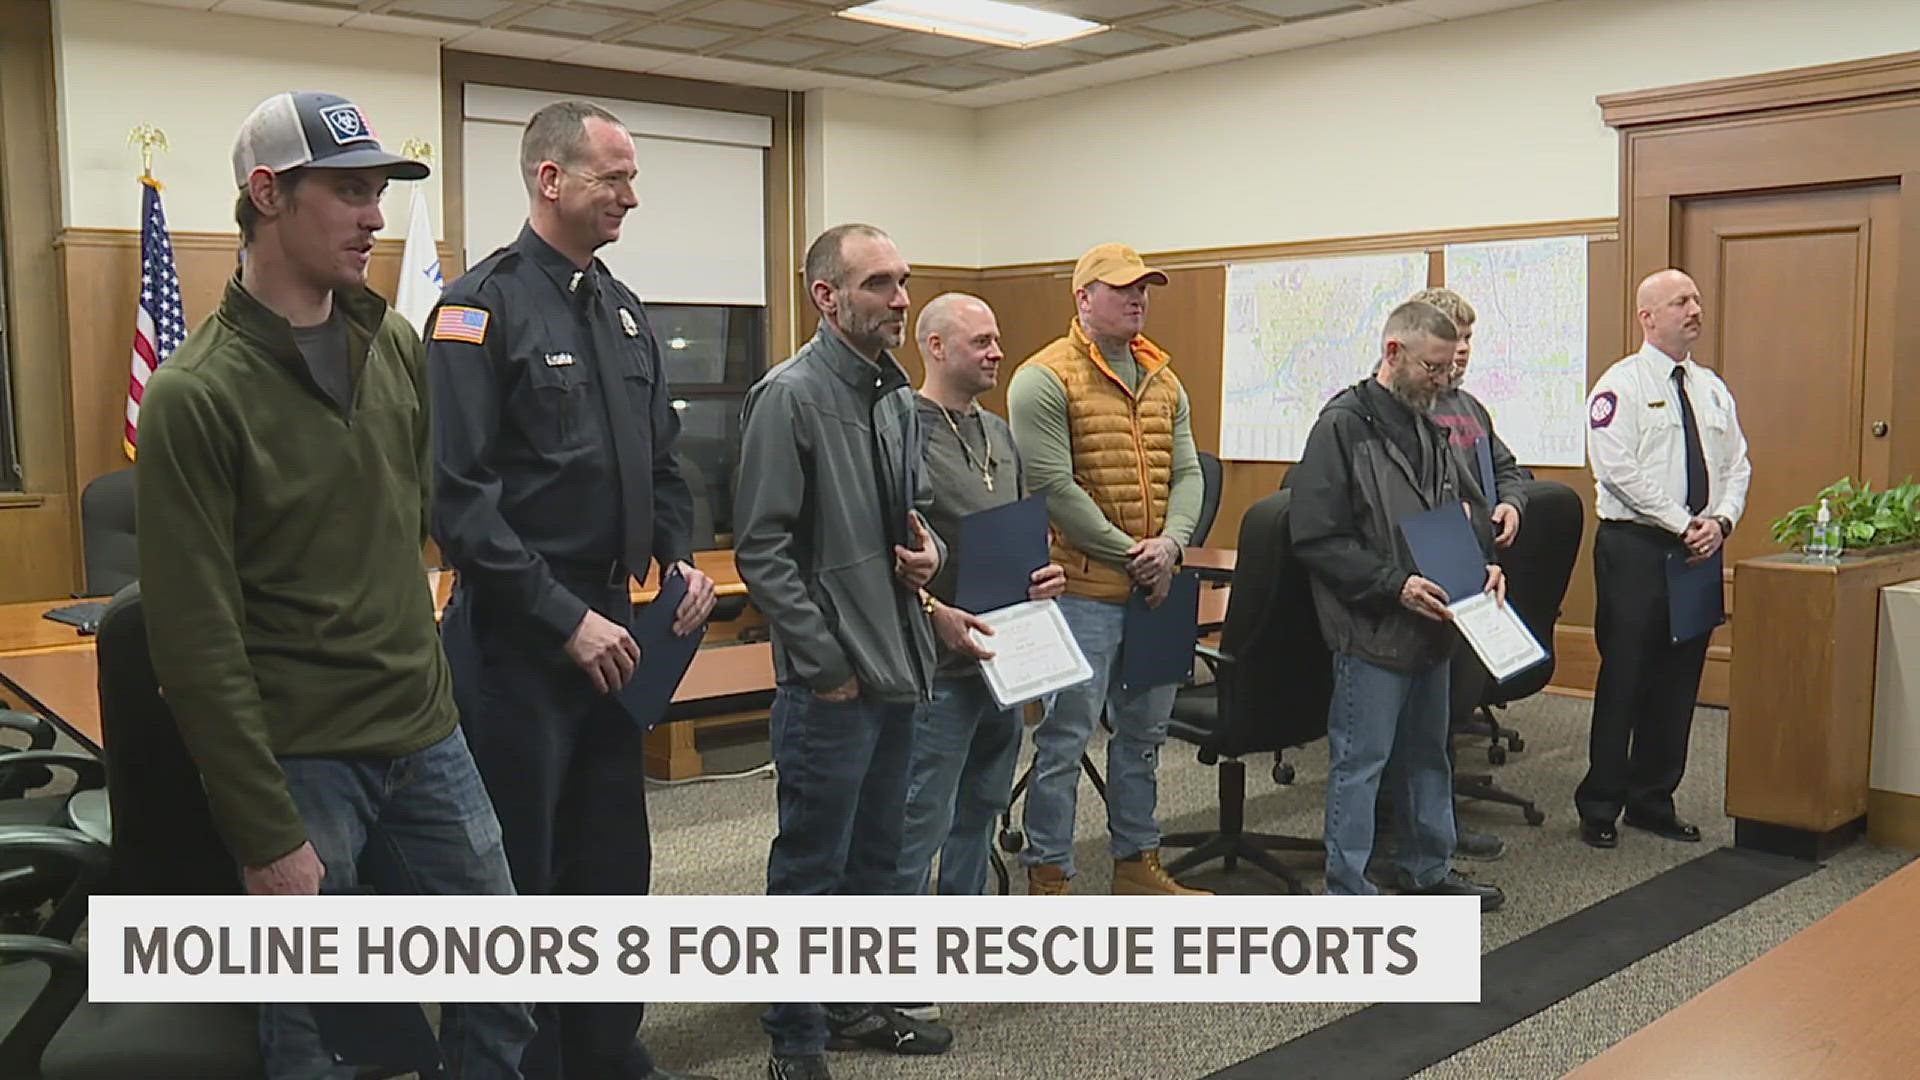 The eight individuals all received life saving awards, for springing into action, saving several lives in a January, 25 fire.